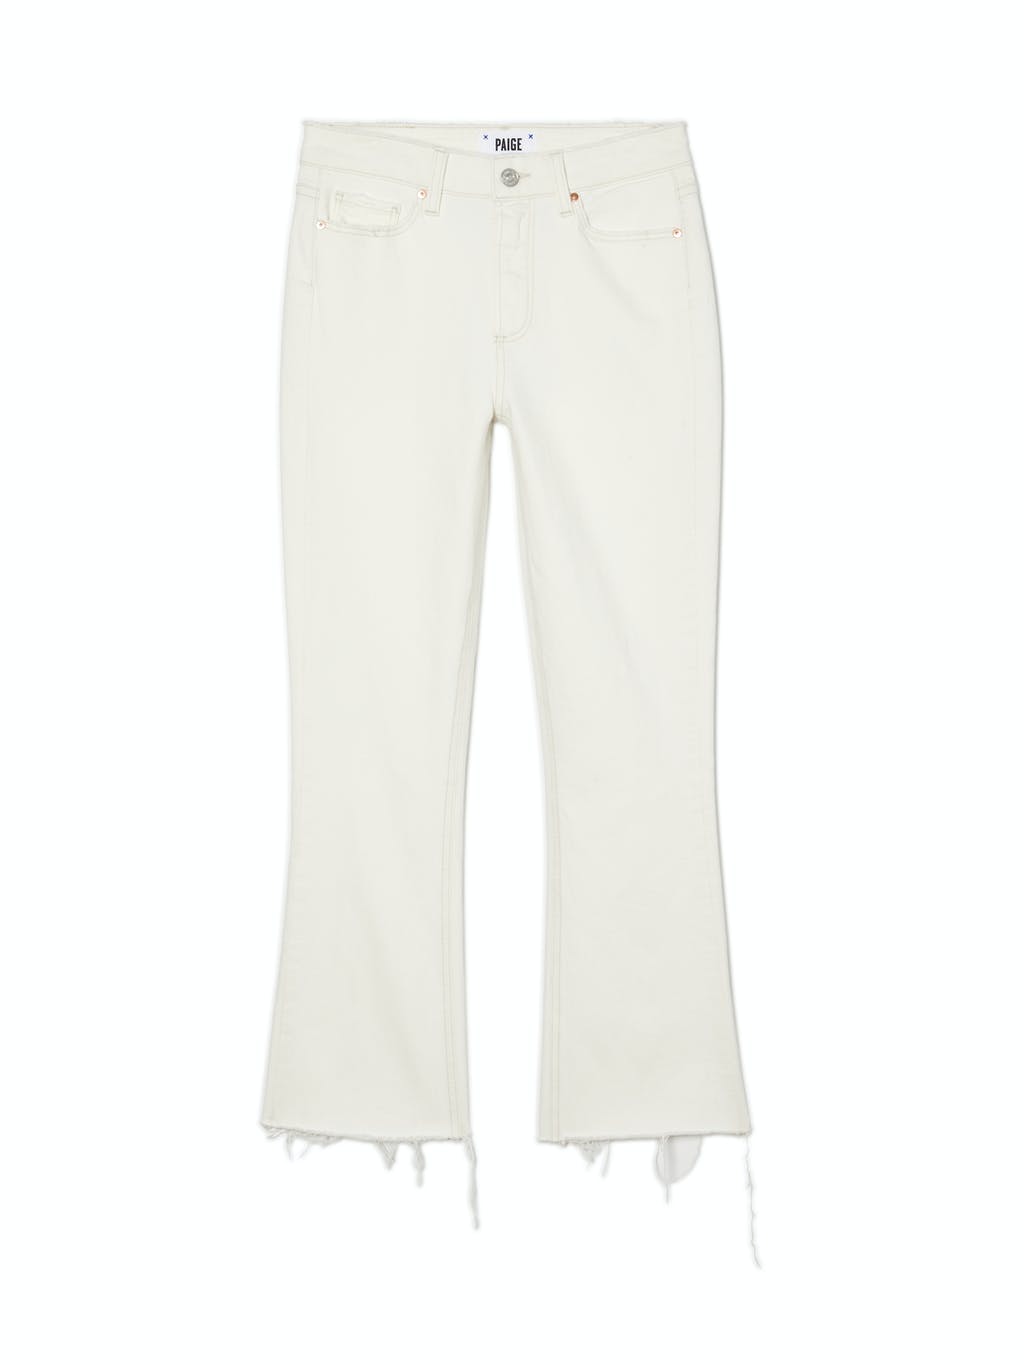 Colette Crop Flare with Raw Hem Jean